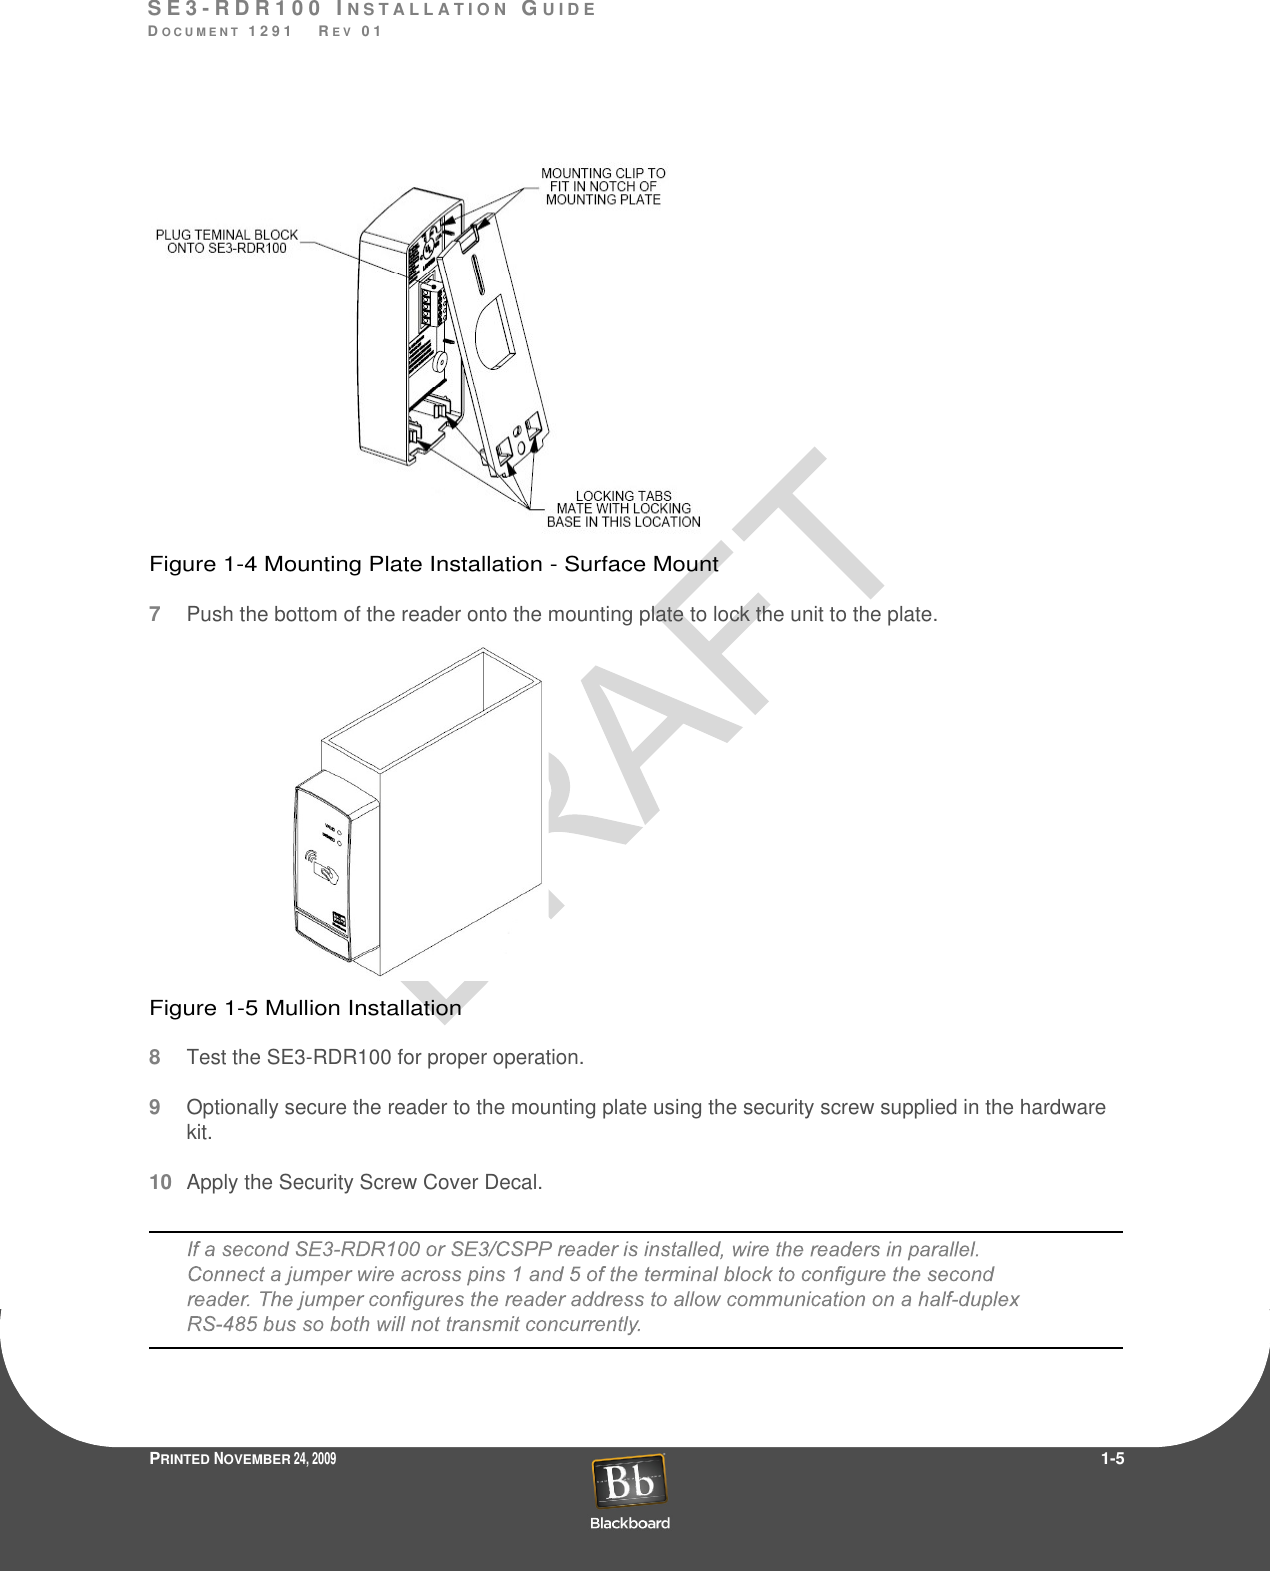 S E 3 - R D R 1 0 0  I N S T A L L A T I O N  GU I D EDO C U M E N T  1 2 9 1    R E V  0 1PRINTED NOVEMBER 24, 2009                 1-5Figure 1-4 Mounting Plate Installation - Surface Mount7Push the bottom of the reader onto the mounting plate to lock the unit to the plate.Figure 1-5 Mullion Installation8Test the SE3-RDR100 for proper operation.9Optionally secure the reader to the mounting plate using the security screw supplied in the hardware kit.10Apply the Security Screw Cover Decal.